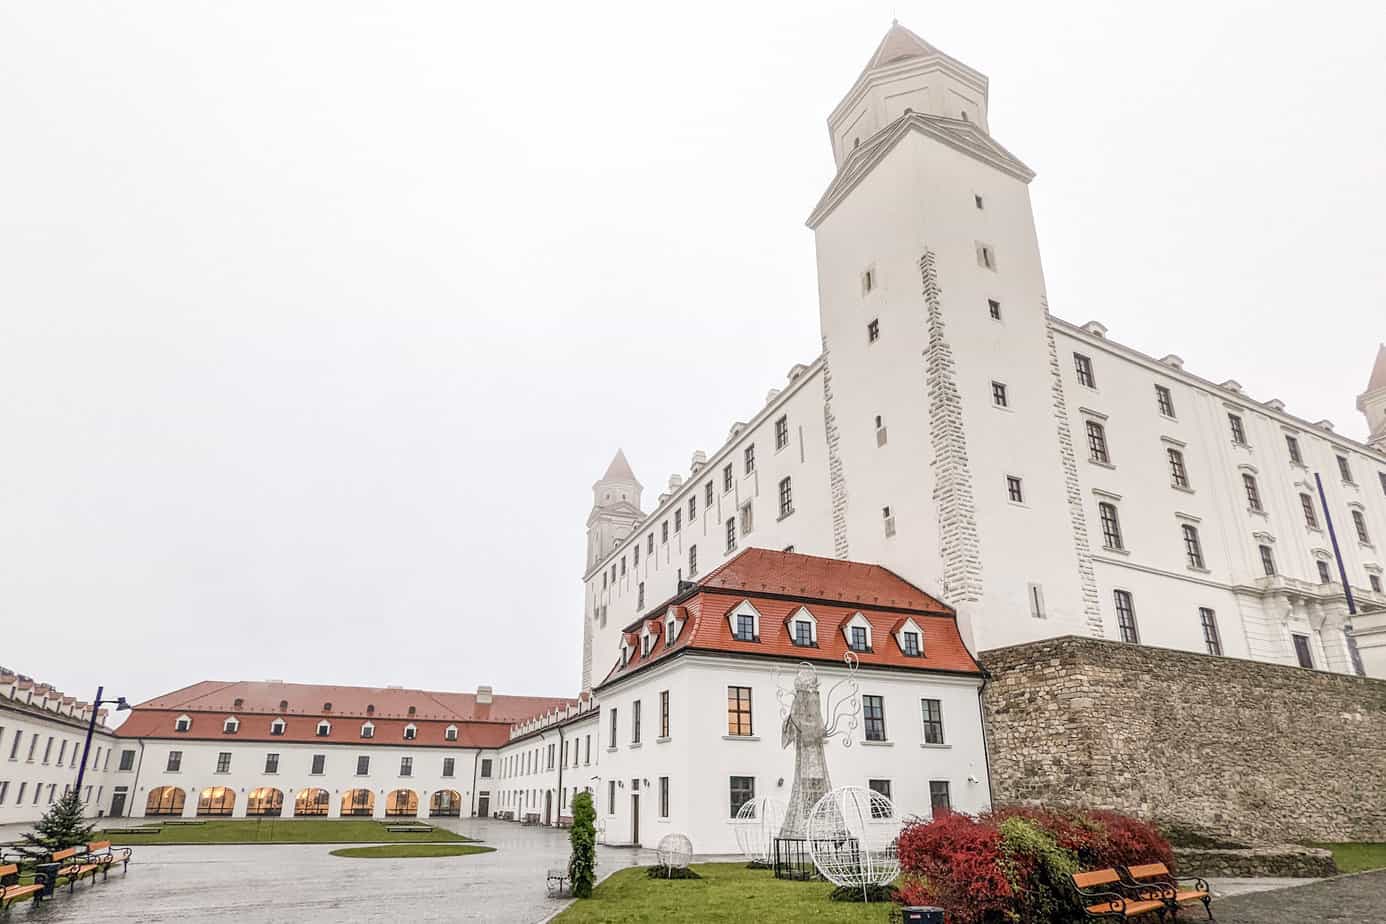 Bratislava castle - white castle with red roof on smaller buildings. Clouded foggy sky overhead